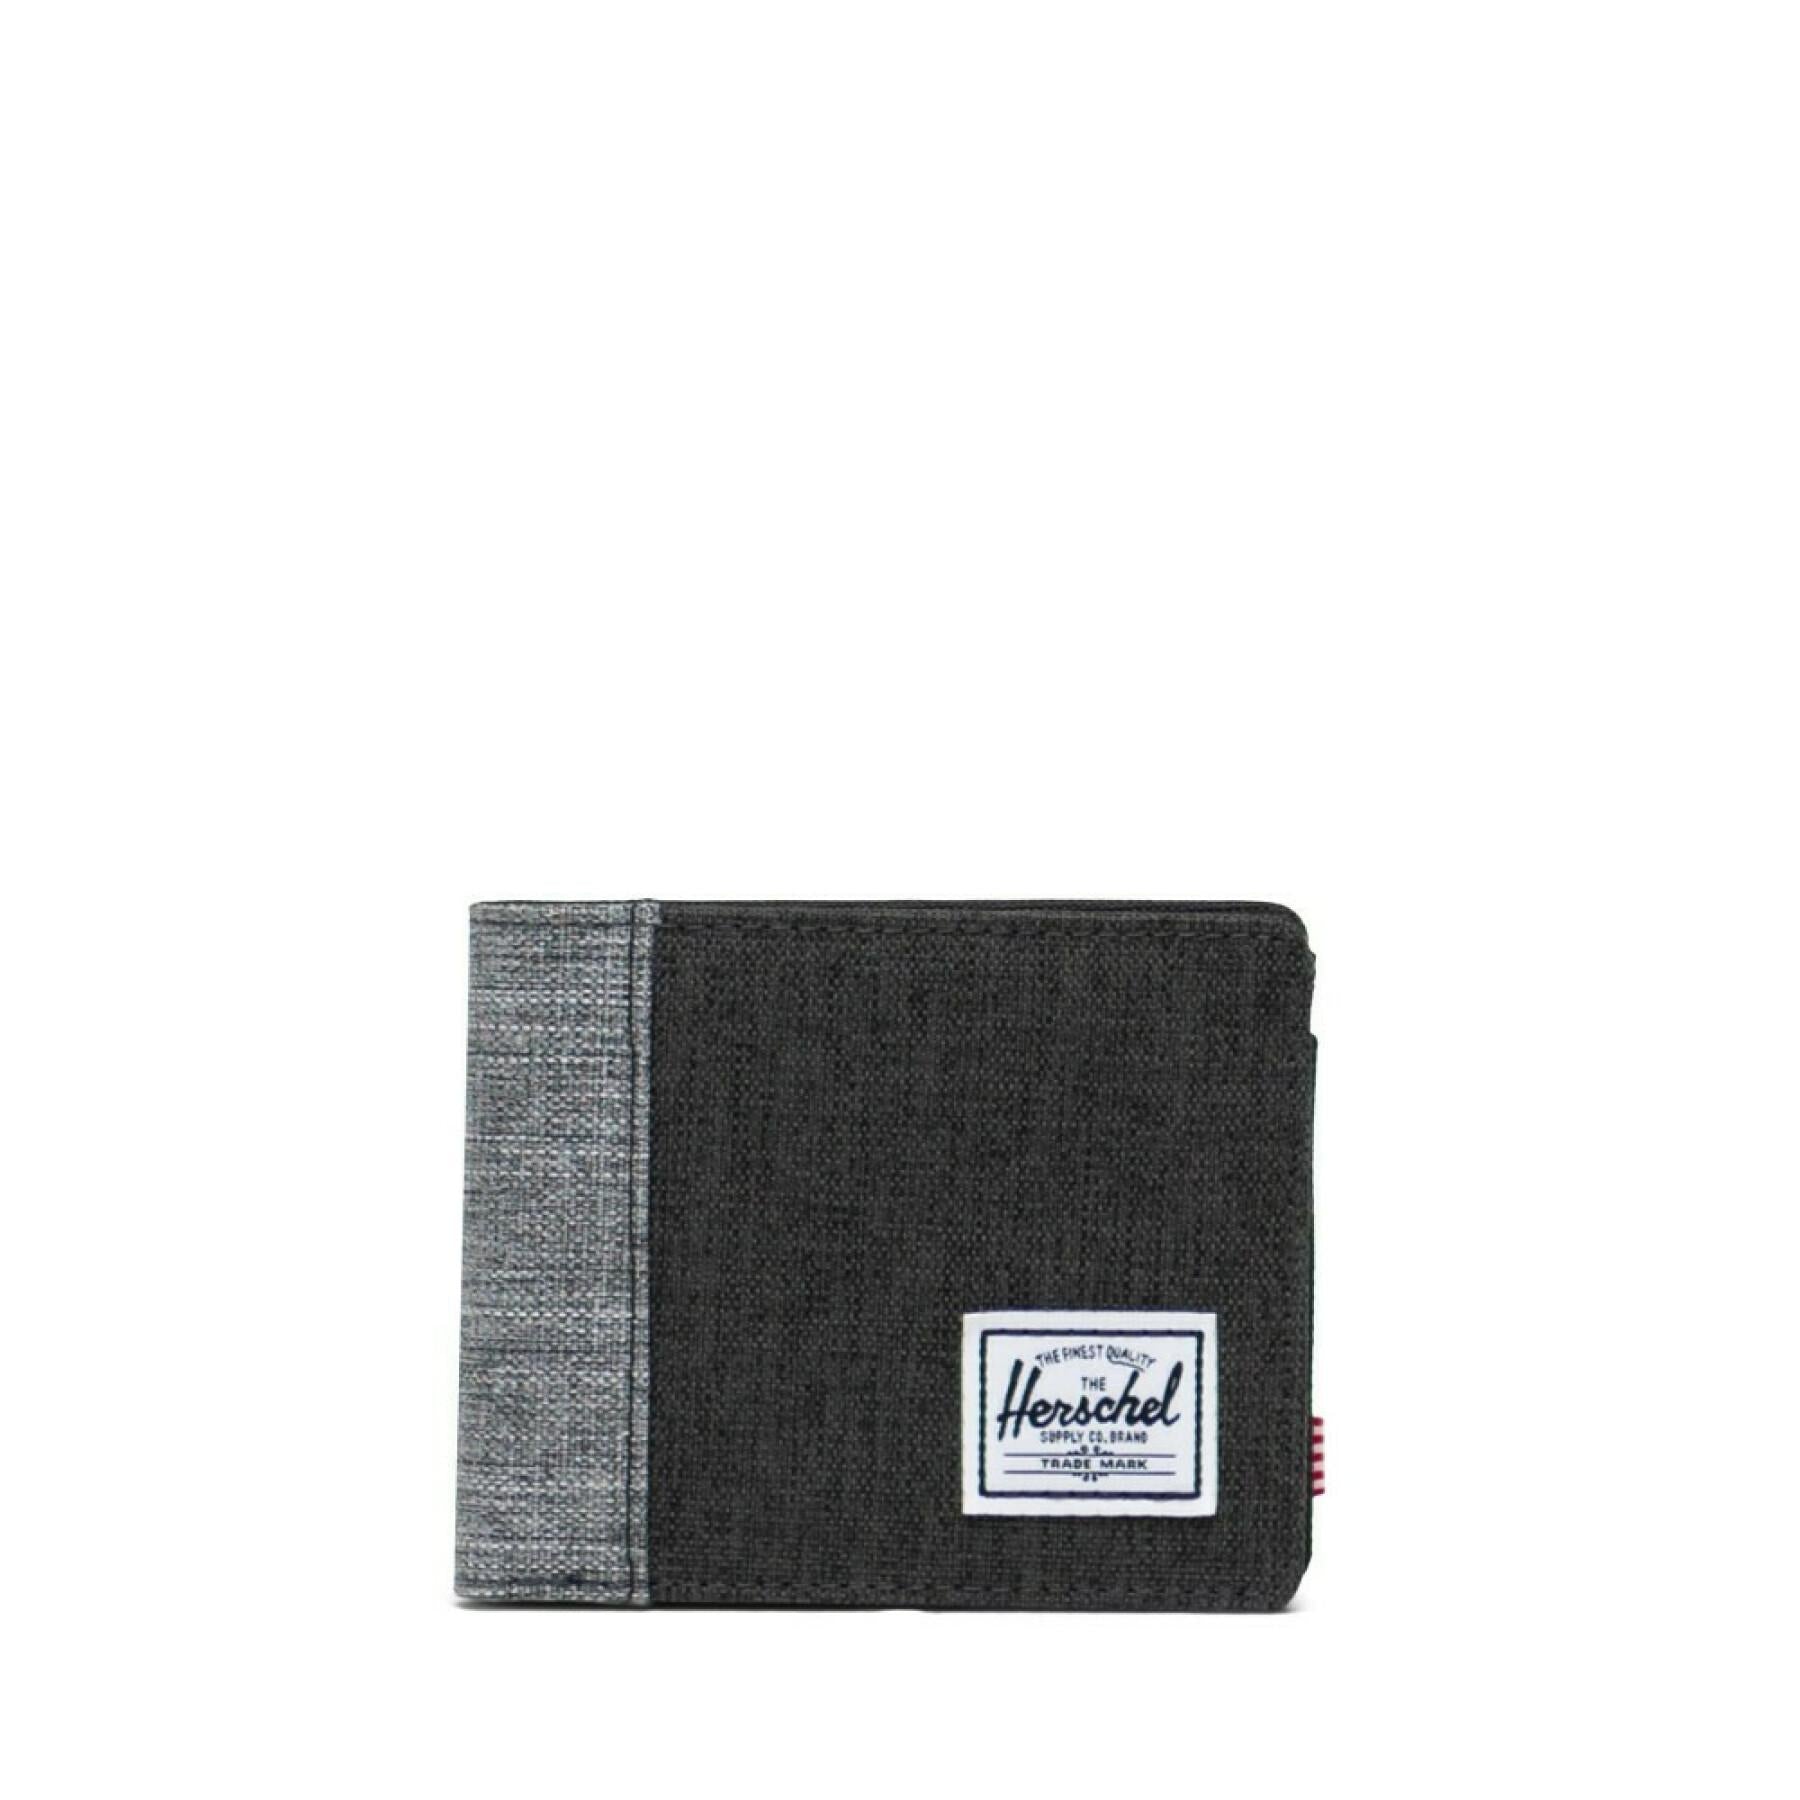 Roy Coin RFID Wallet